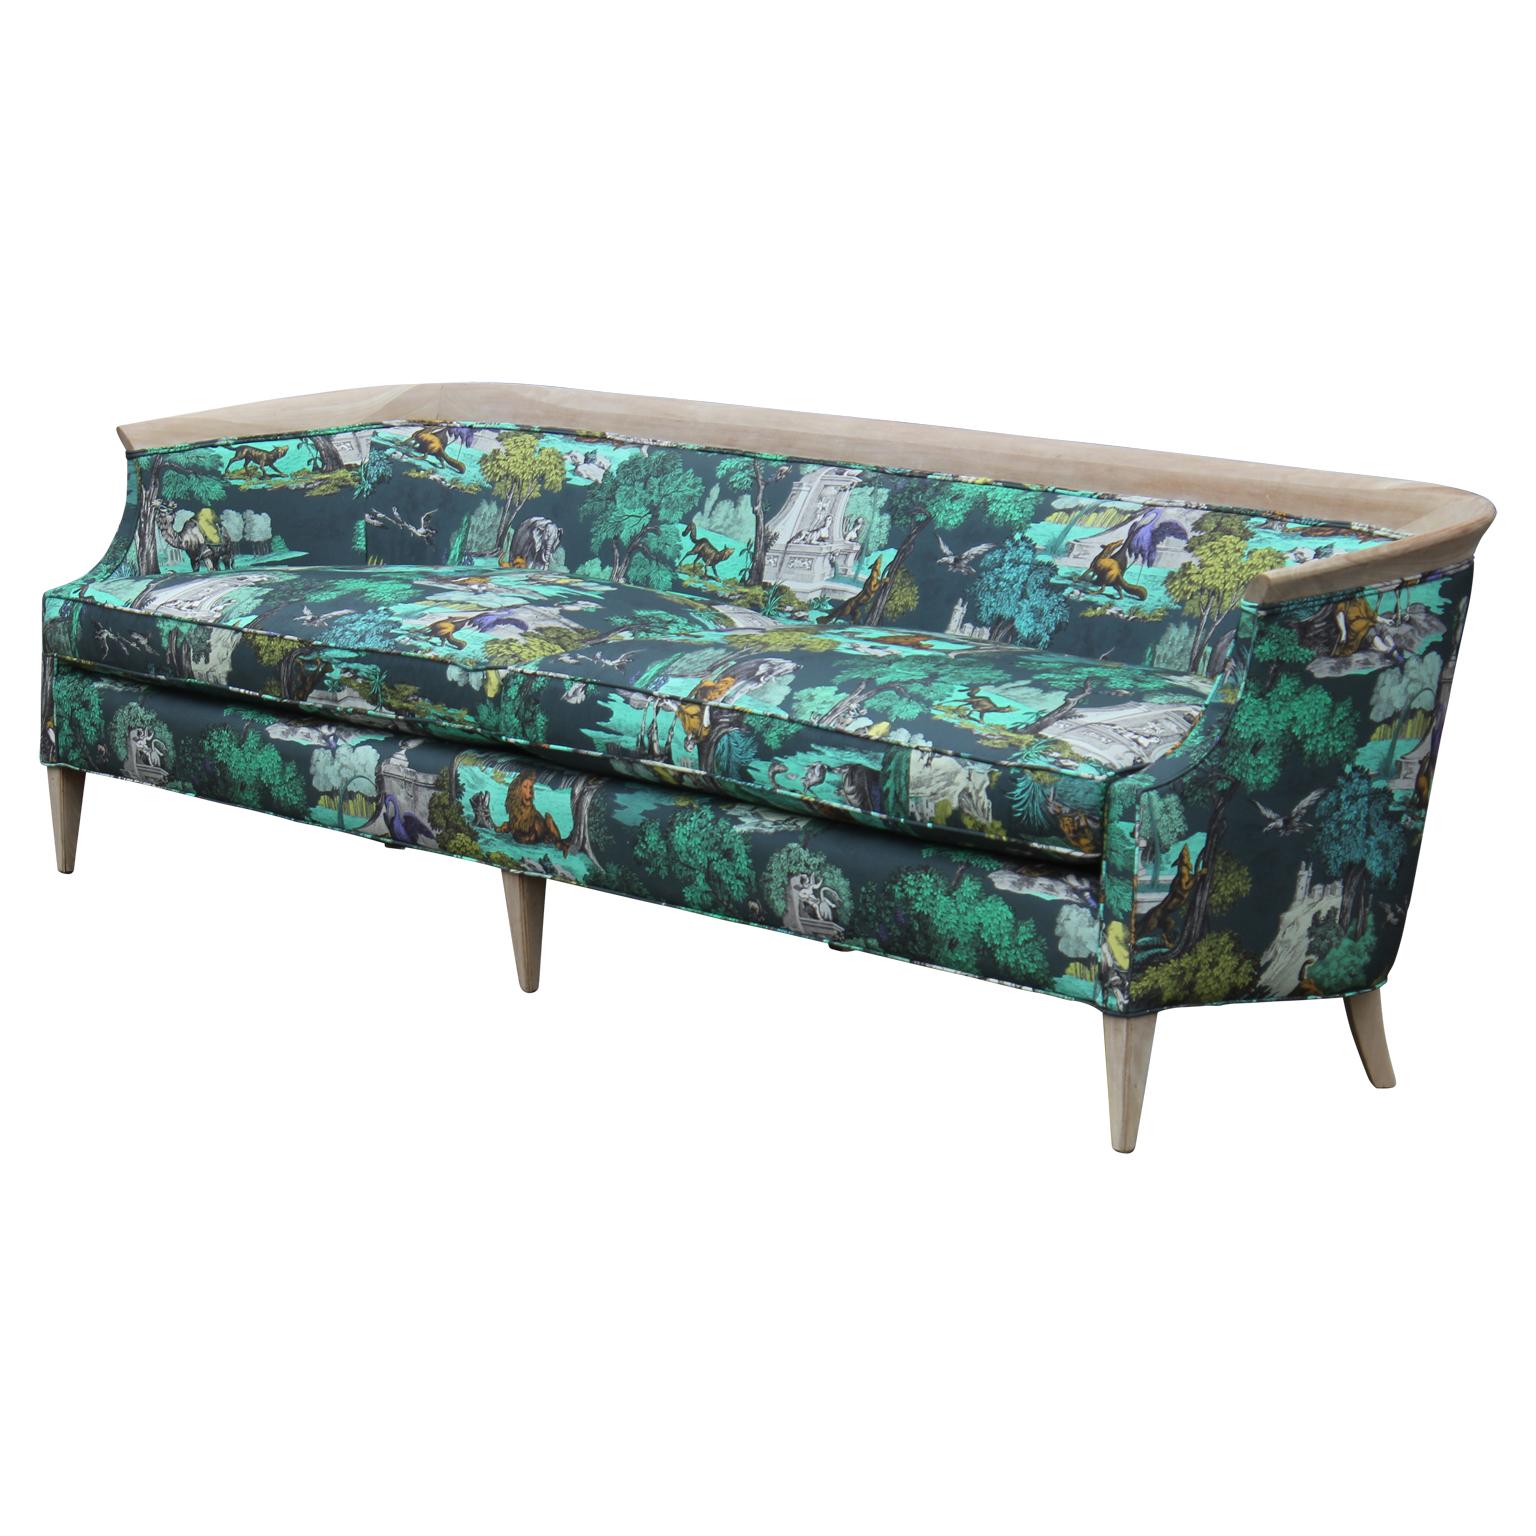 Modern Baker Barrel Back Bleached Mahogany Sofa in Cole & Son "Icons" Fabric